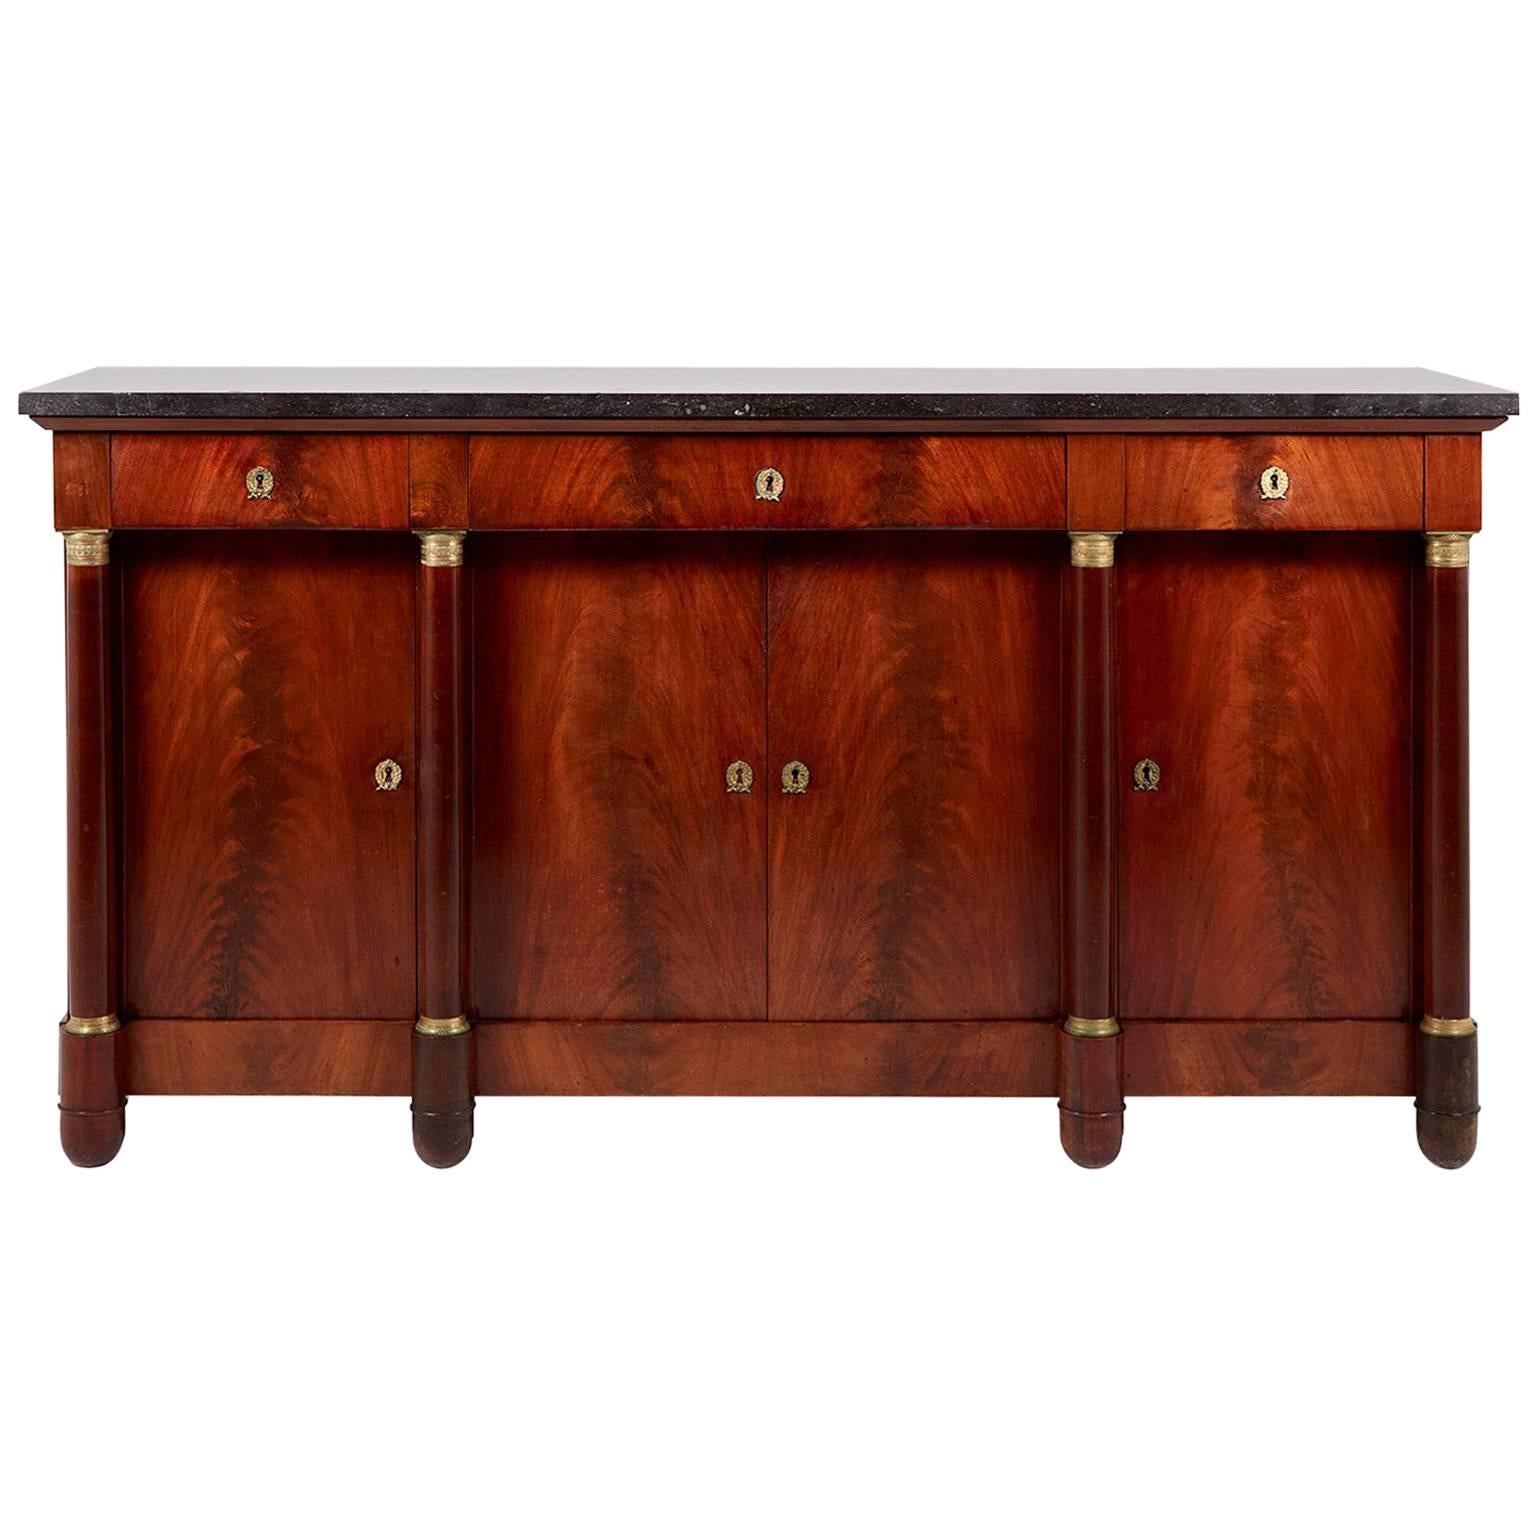 Antique Empire Style Mahogany Sideboard with Columns and Marble Top, circa 1910